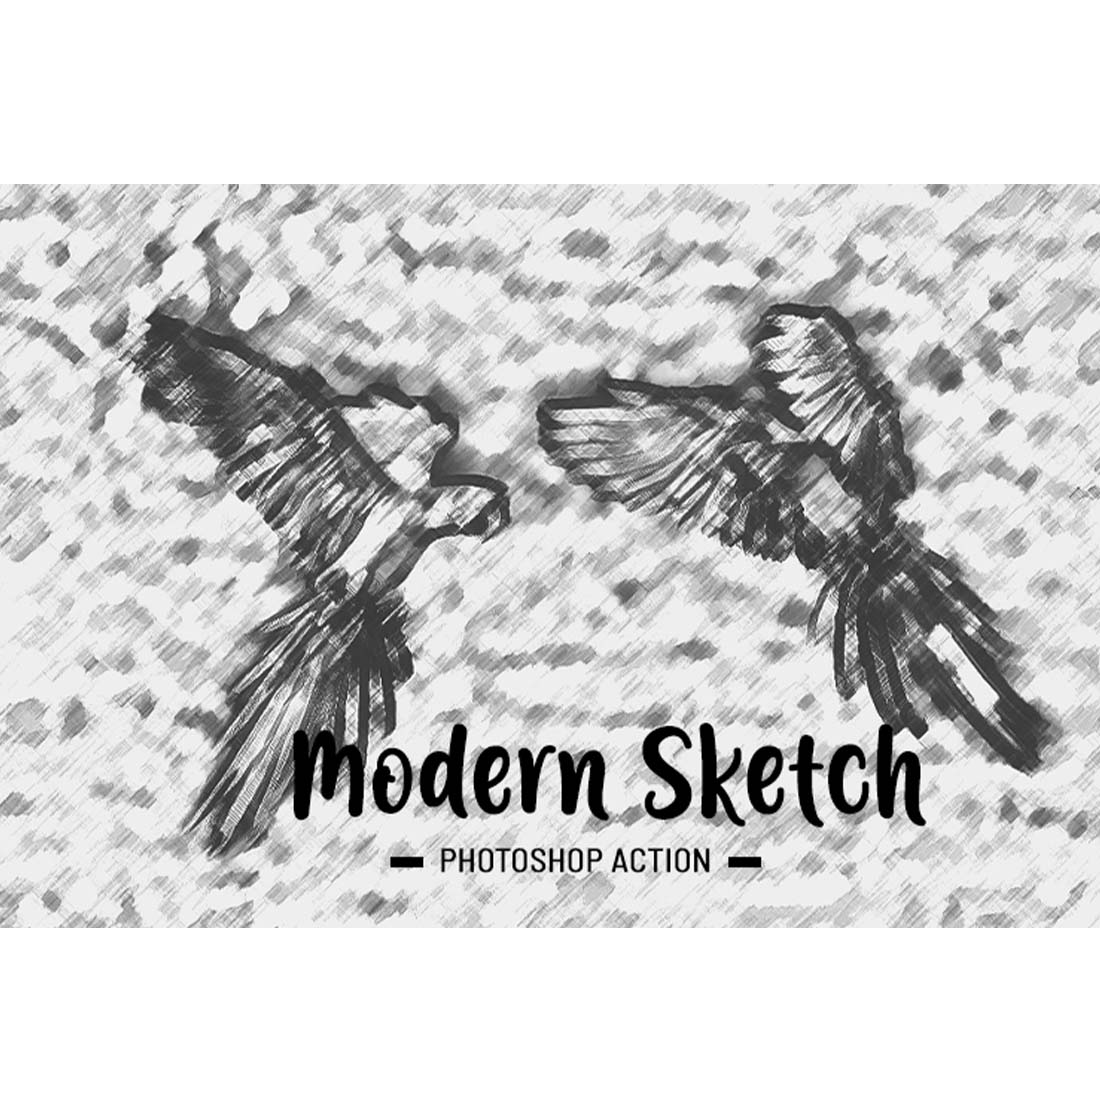 Modern Sketch Photoshop Action cover image.